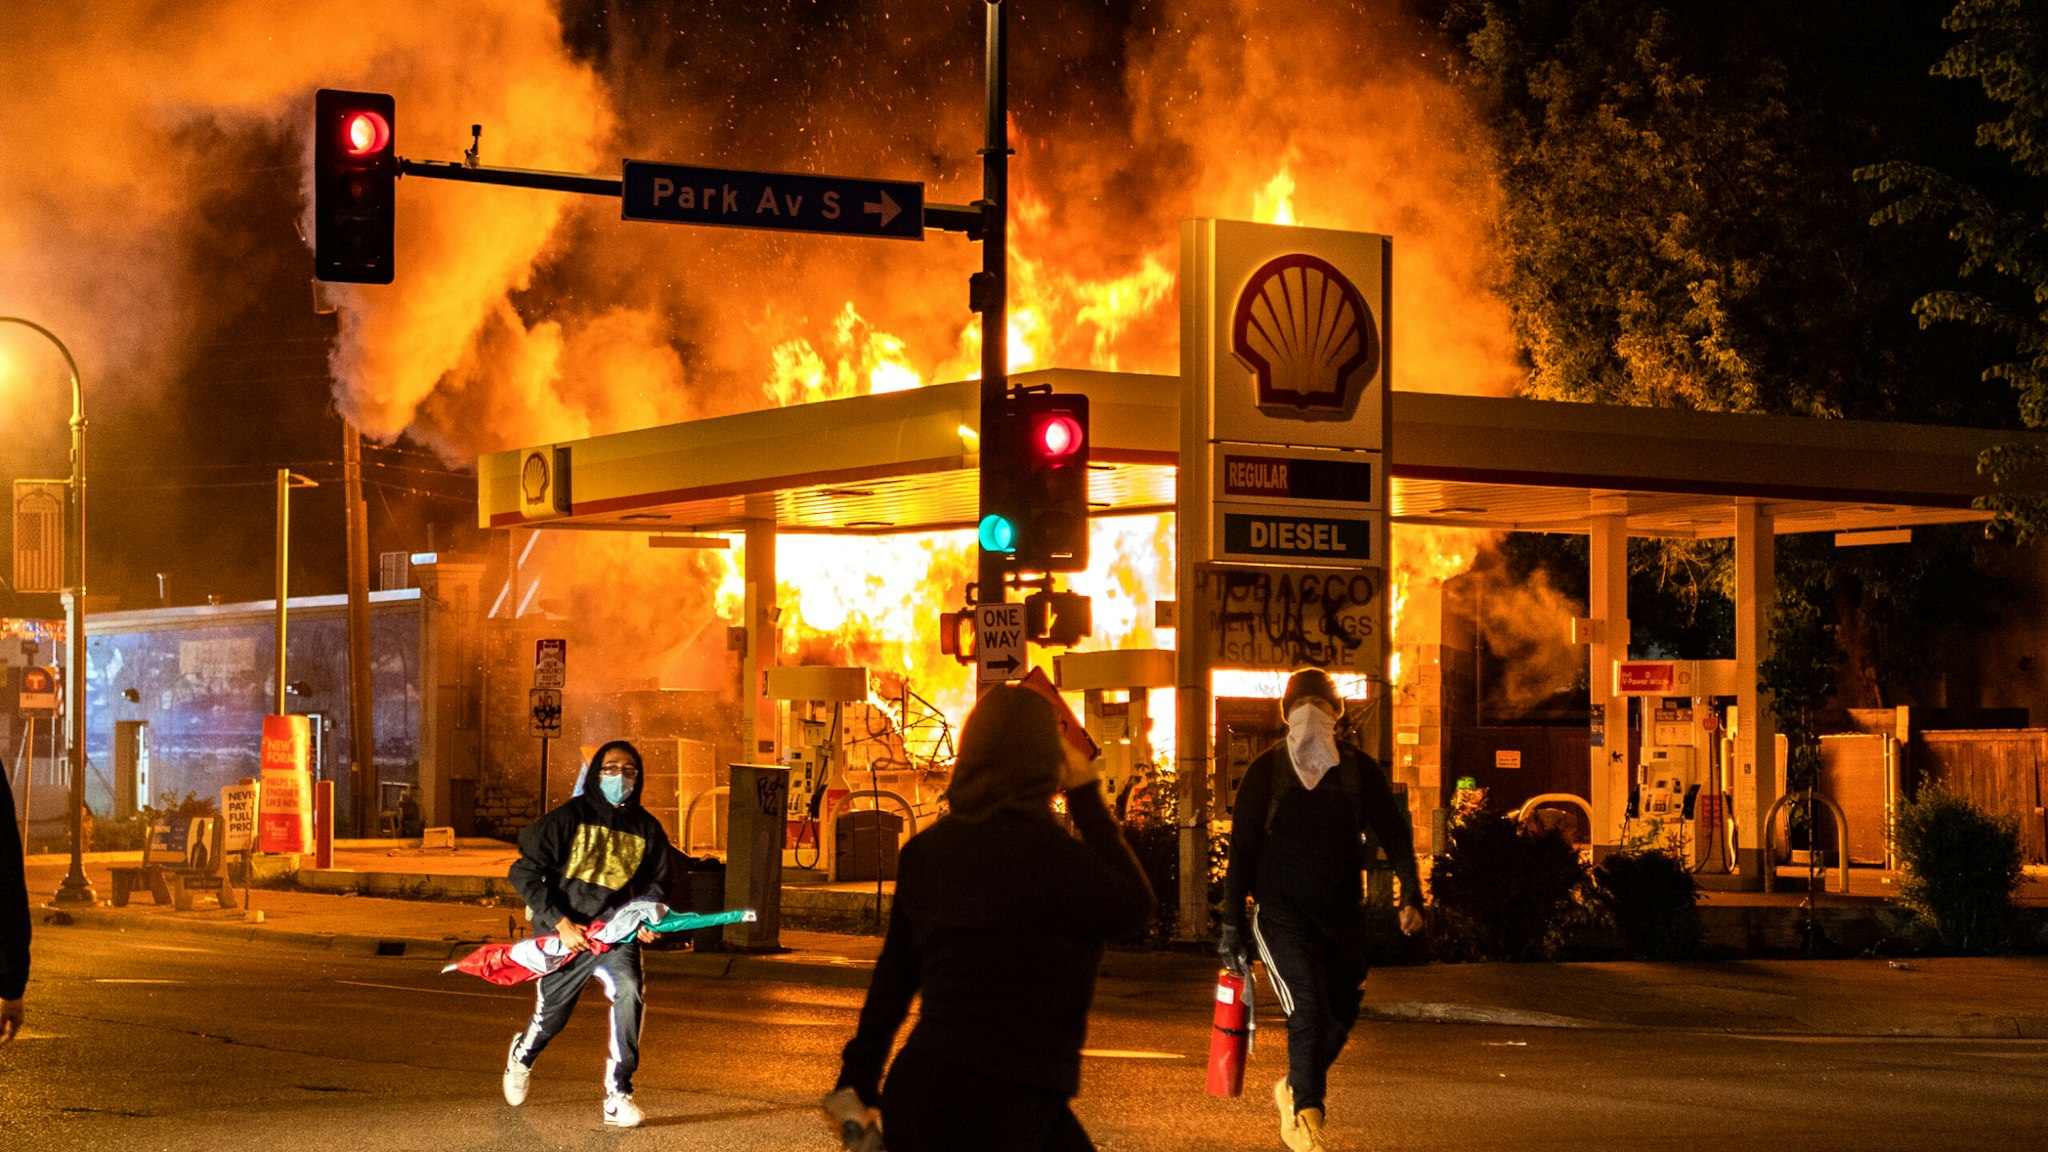 MINNEAPOLIS, MN - MAY 29: Protesters walk past a gas station on the corner of Park Ave S and E. Lake St that is on fire on Friday, May 29, 2020, in Minneapolis, MN. Protests in the wake of the death of George Floyd while in police custody swept country overnight Thursday.